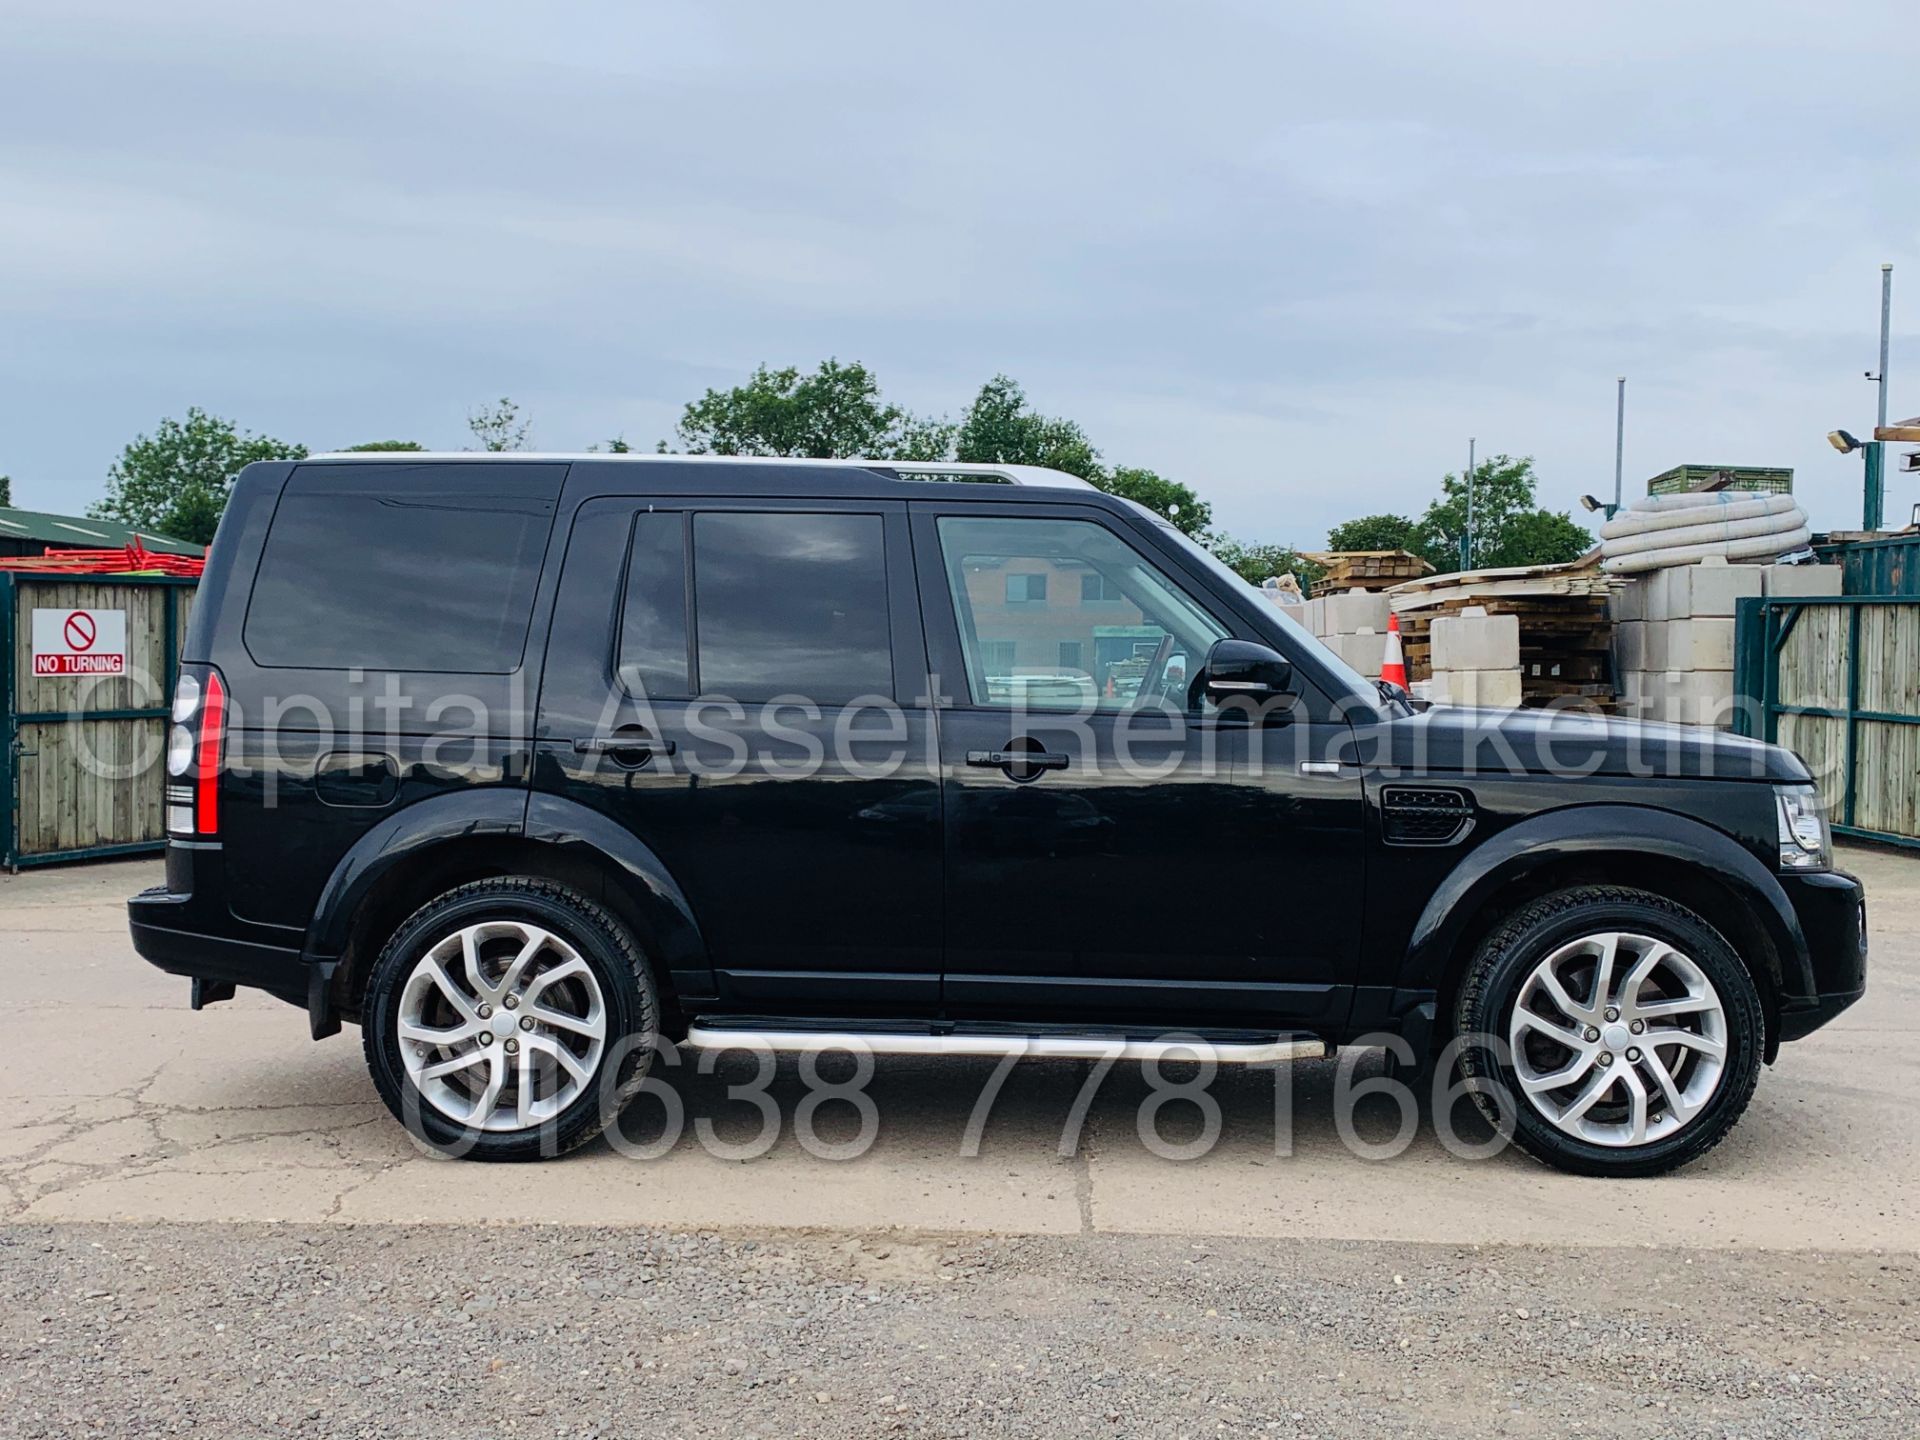 (On Sale) LAND ROVER DISCOVERY 4 *LANDMARK* 7 SEATER SUV (2016) '3.0 SDV6 - 8 SPEED AUTO' (1 OWNER) - Image 14 of 65